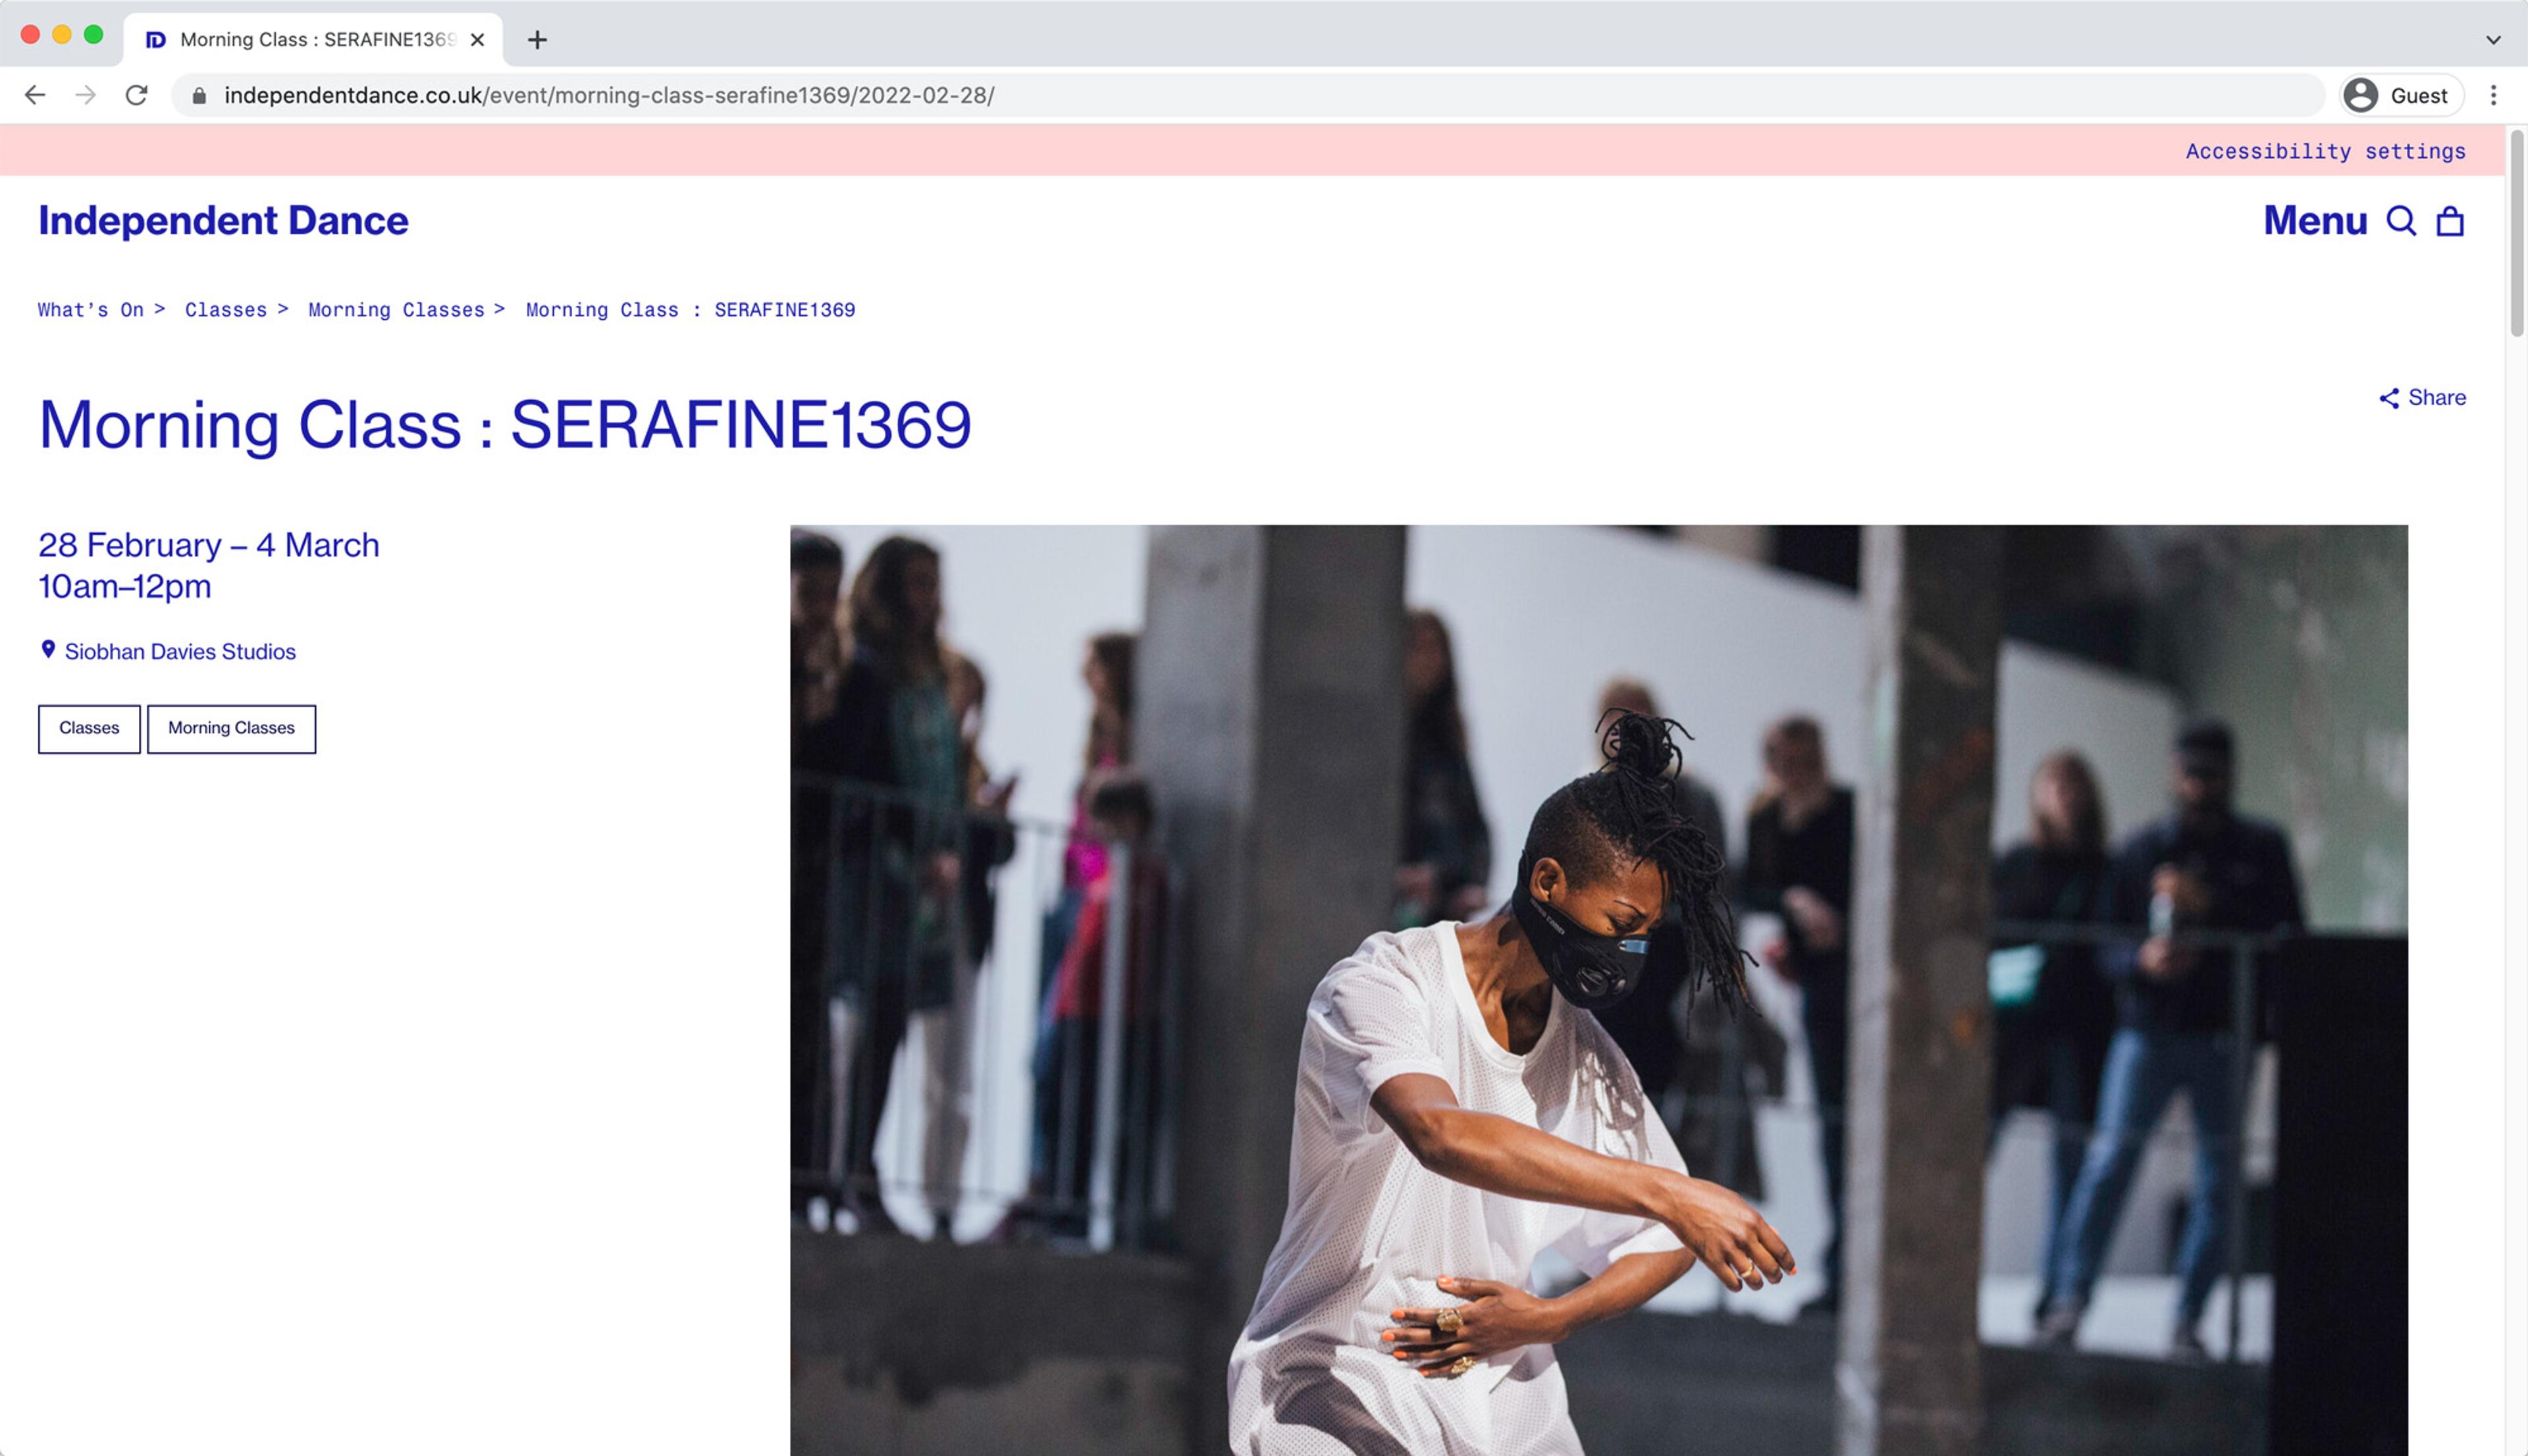 Screengrab of Independent Dance event page